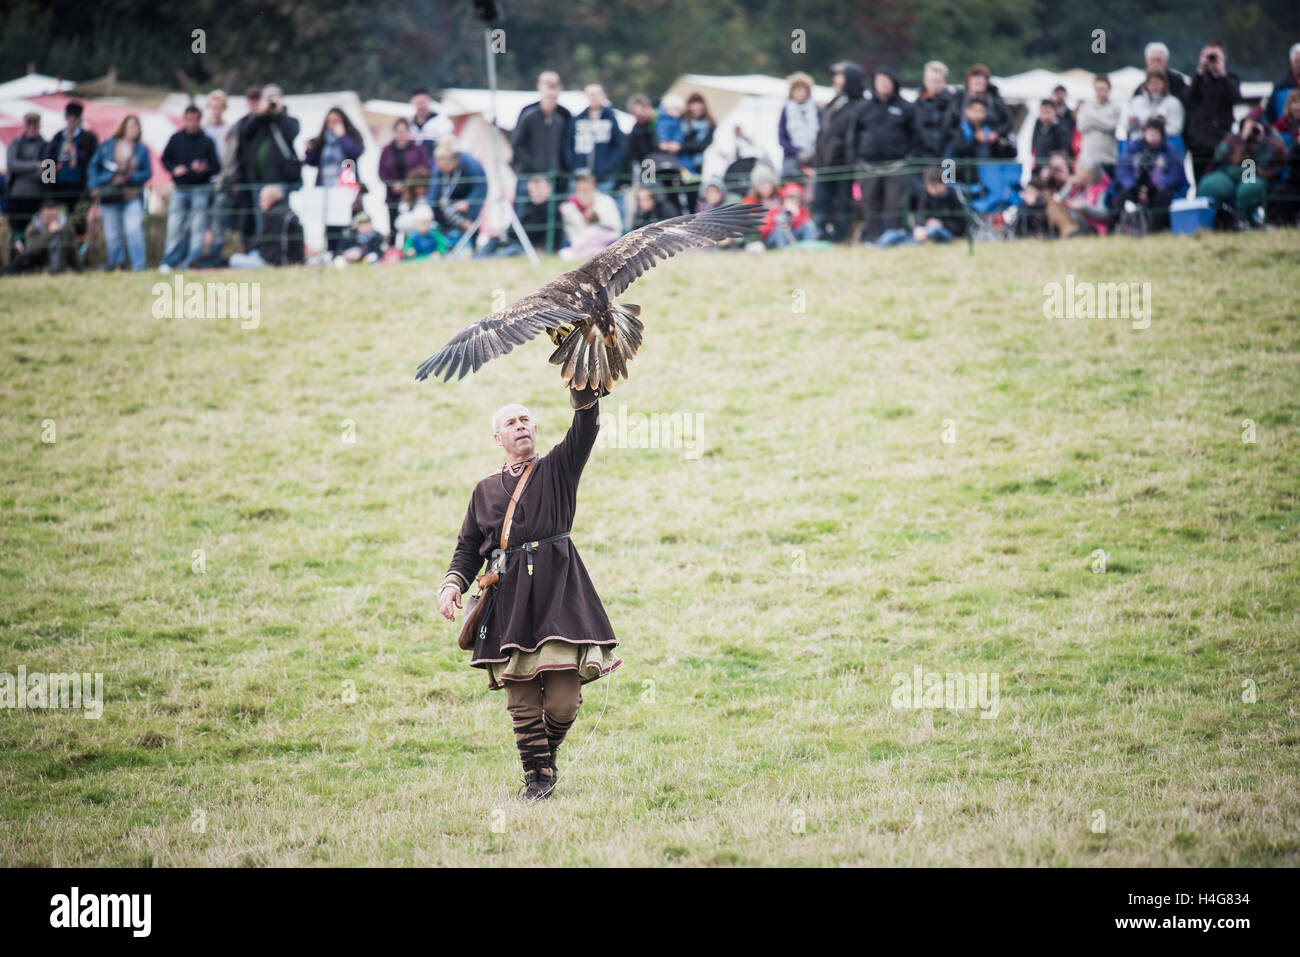 Re-enactment of the battle of Hastings in England, organised by English Heritage. Stock Photo